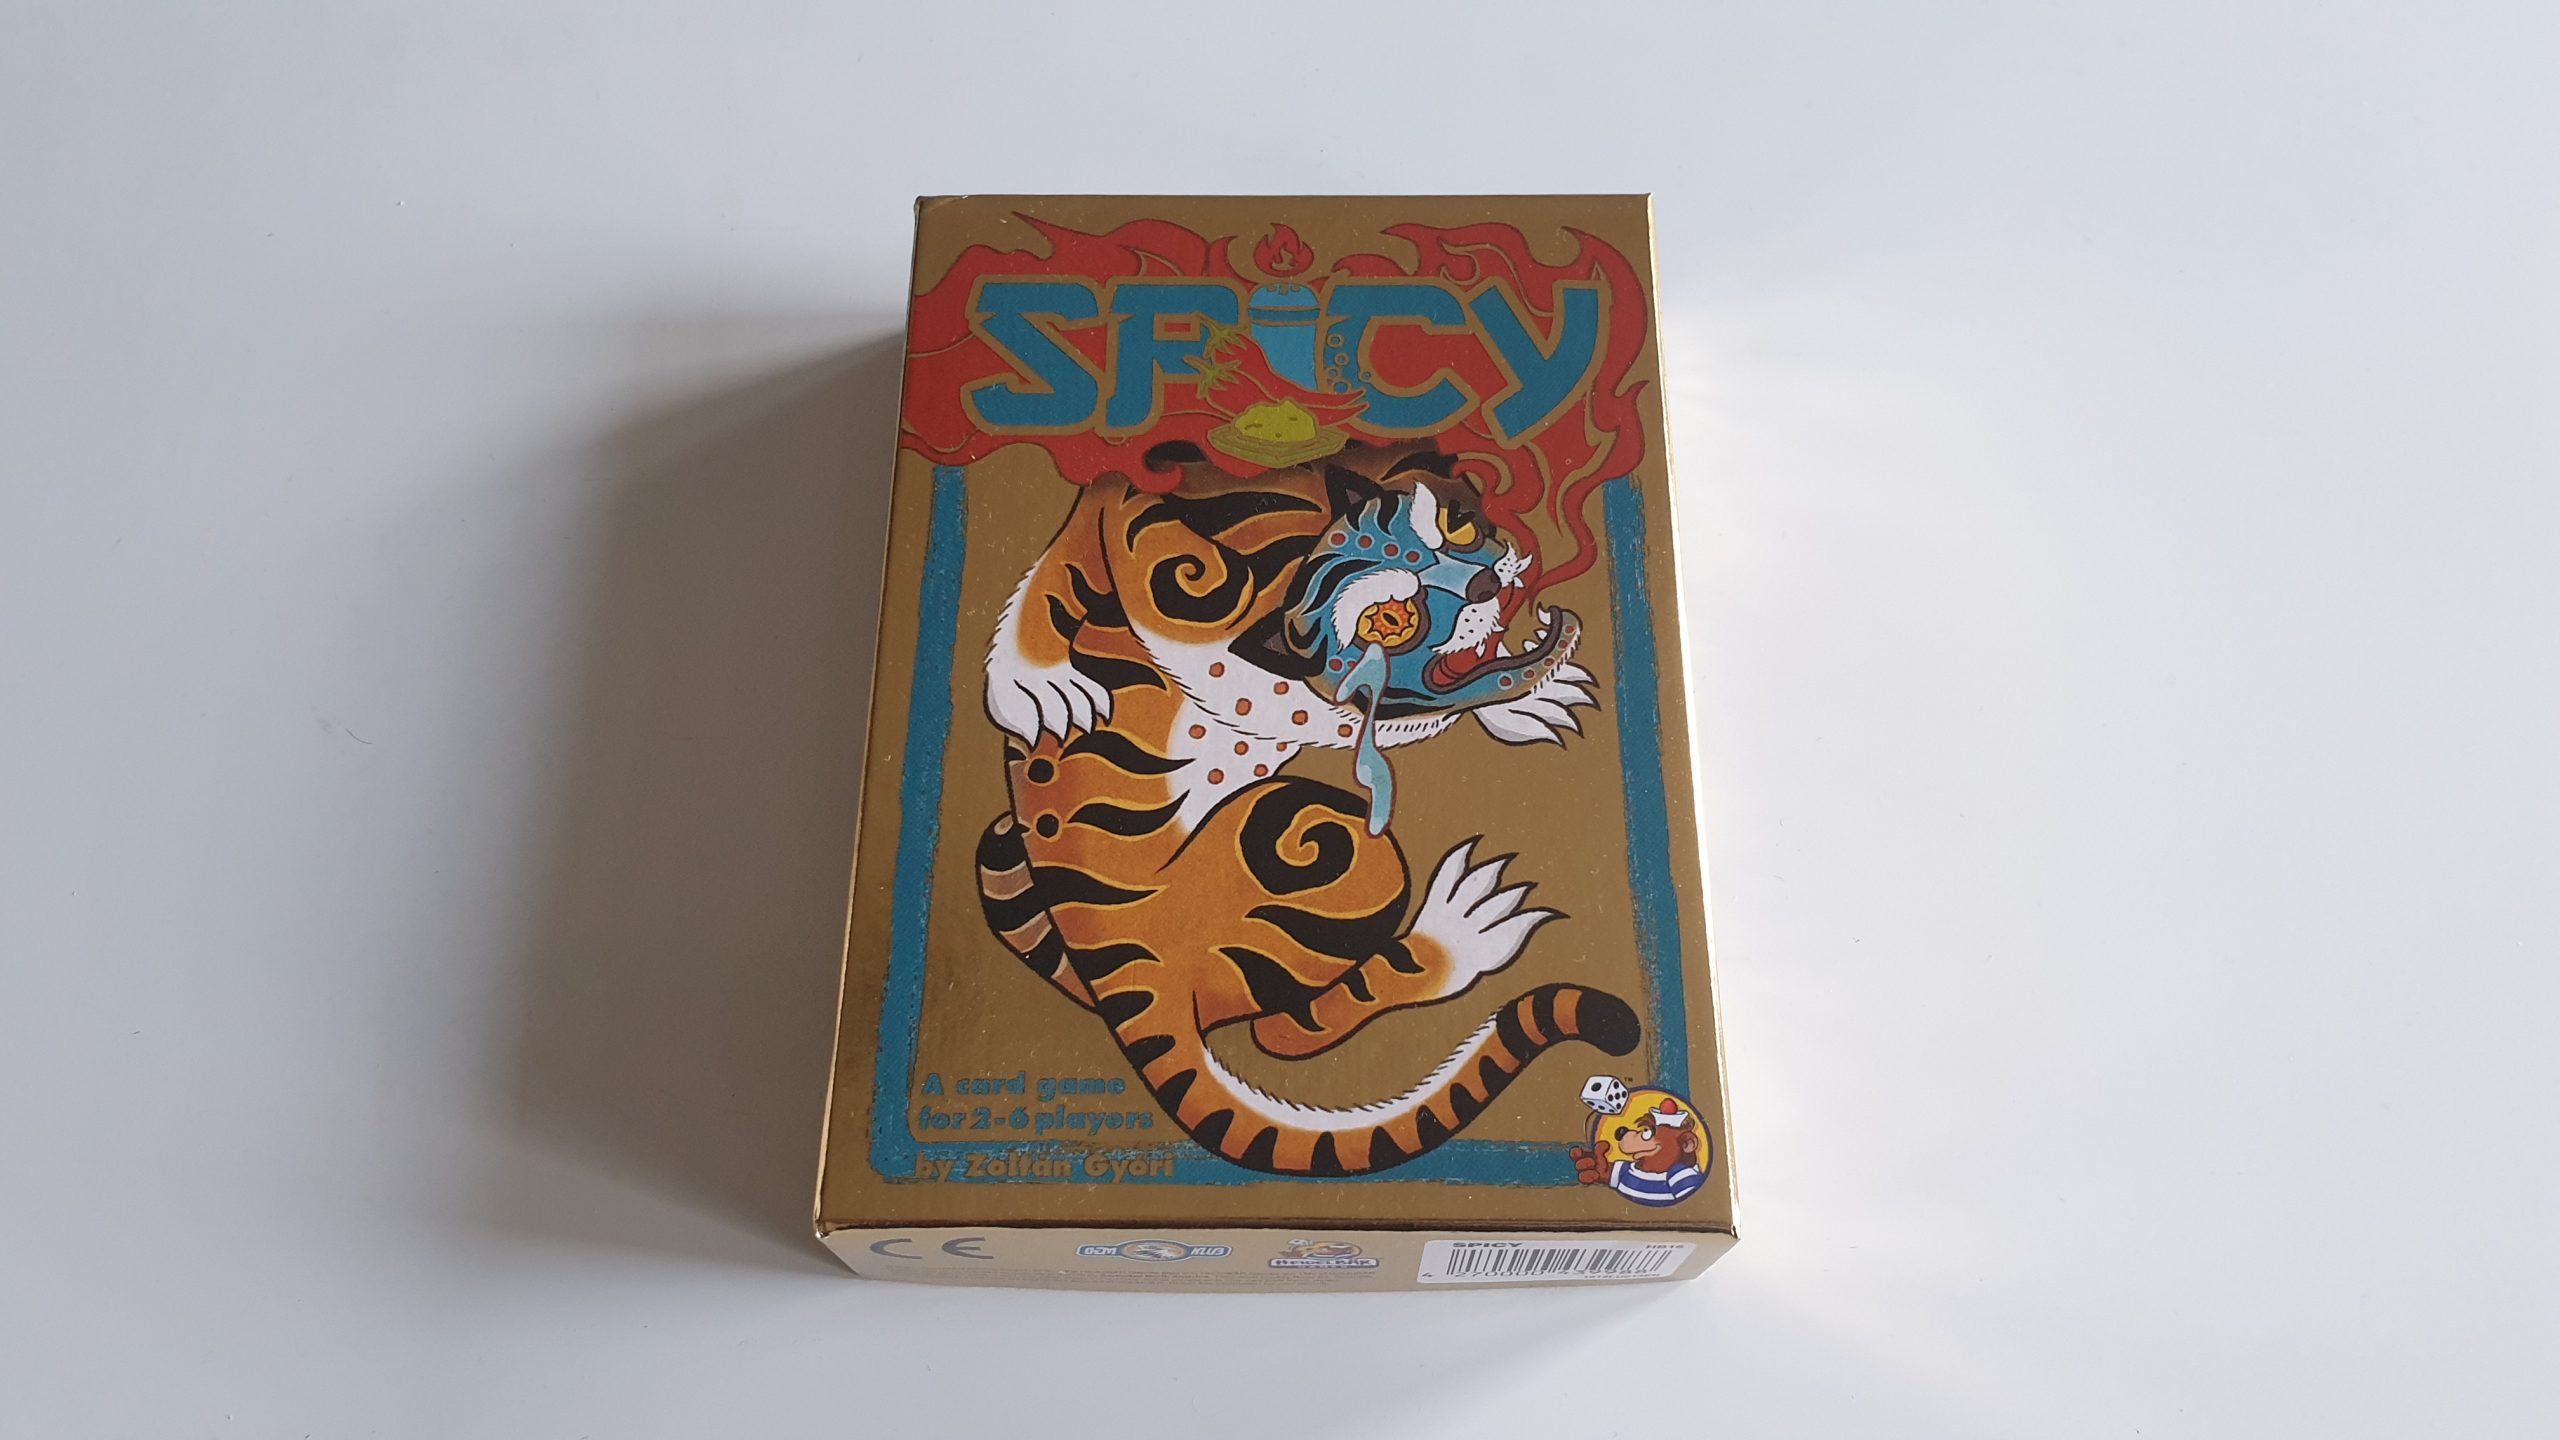 Spicy Review – A Hot New Card Game